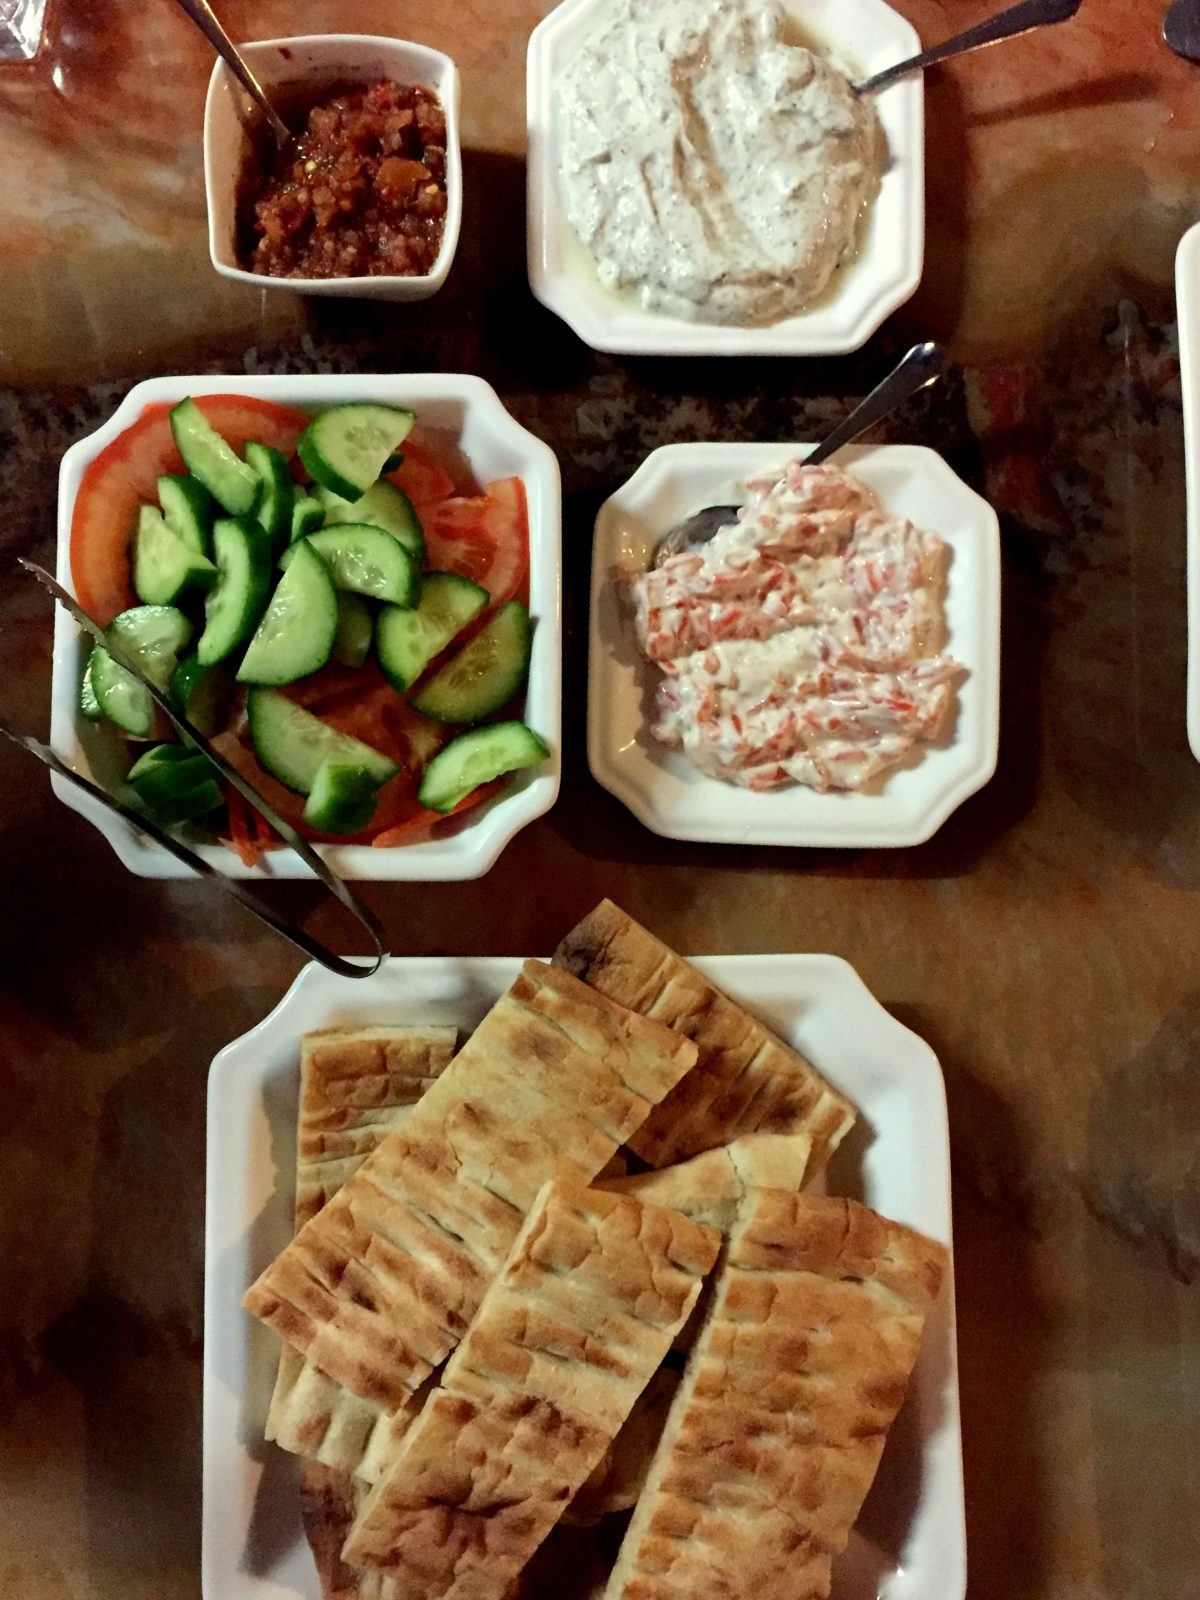 Afghan bread, dips, salad and condiments